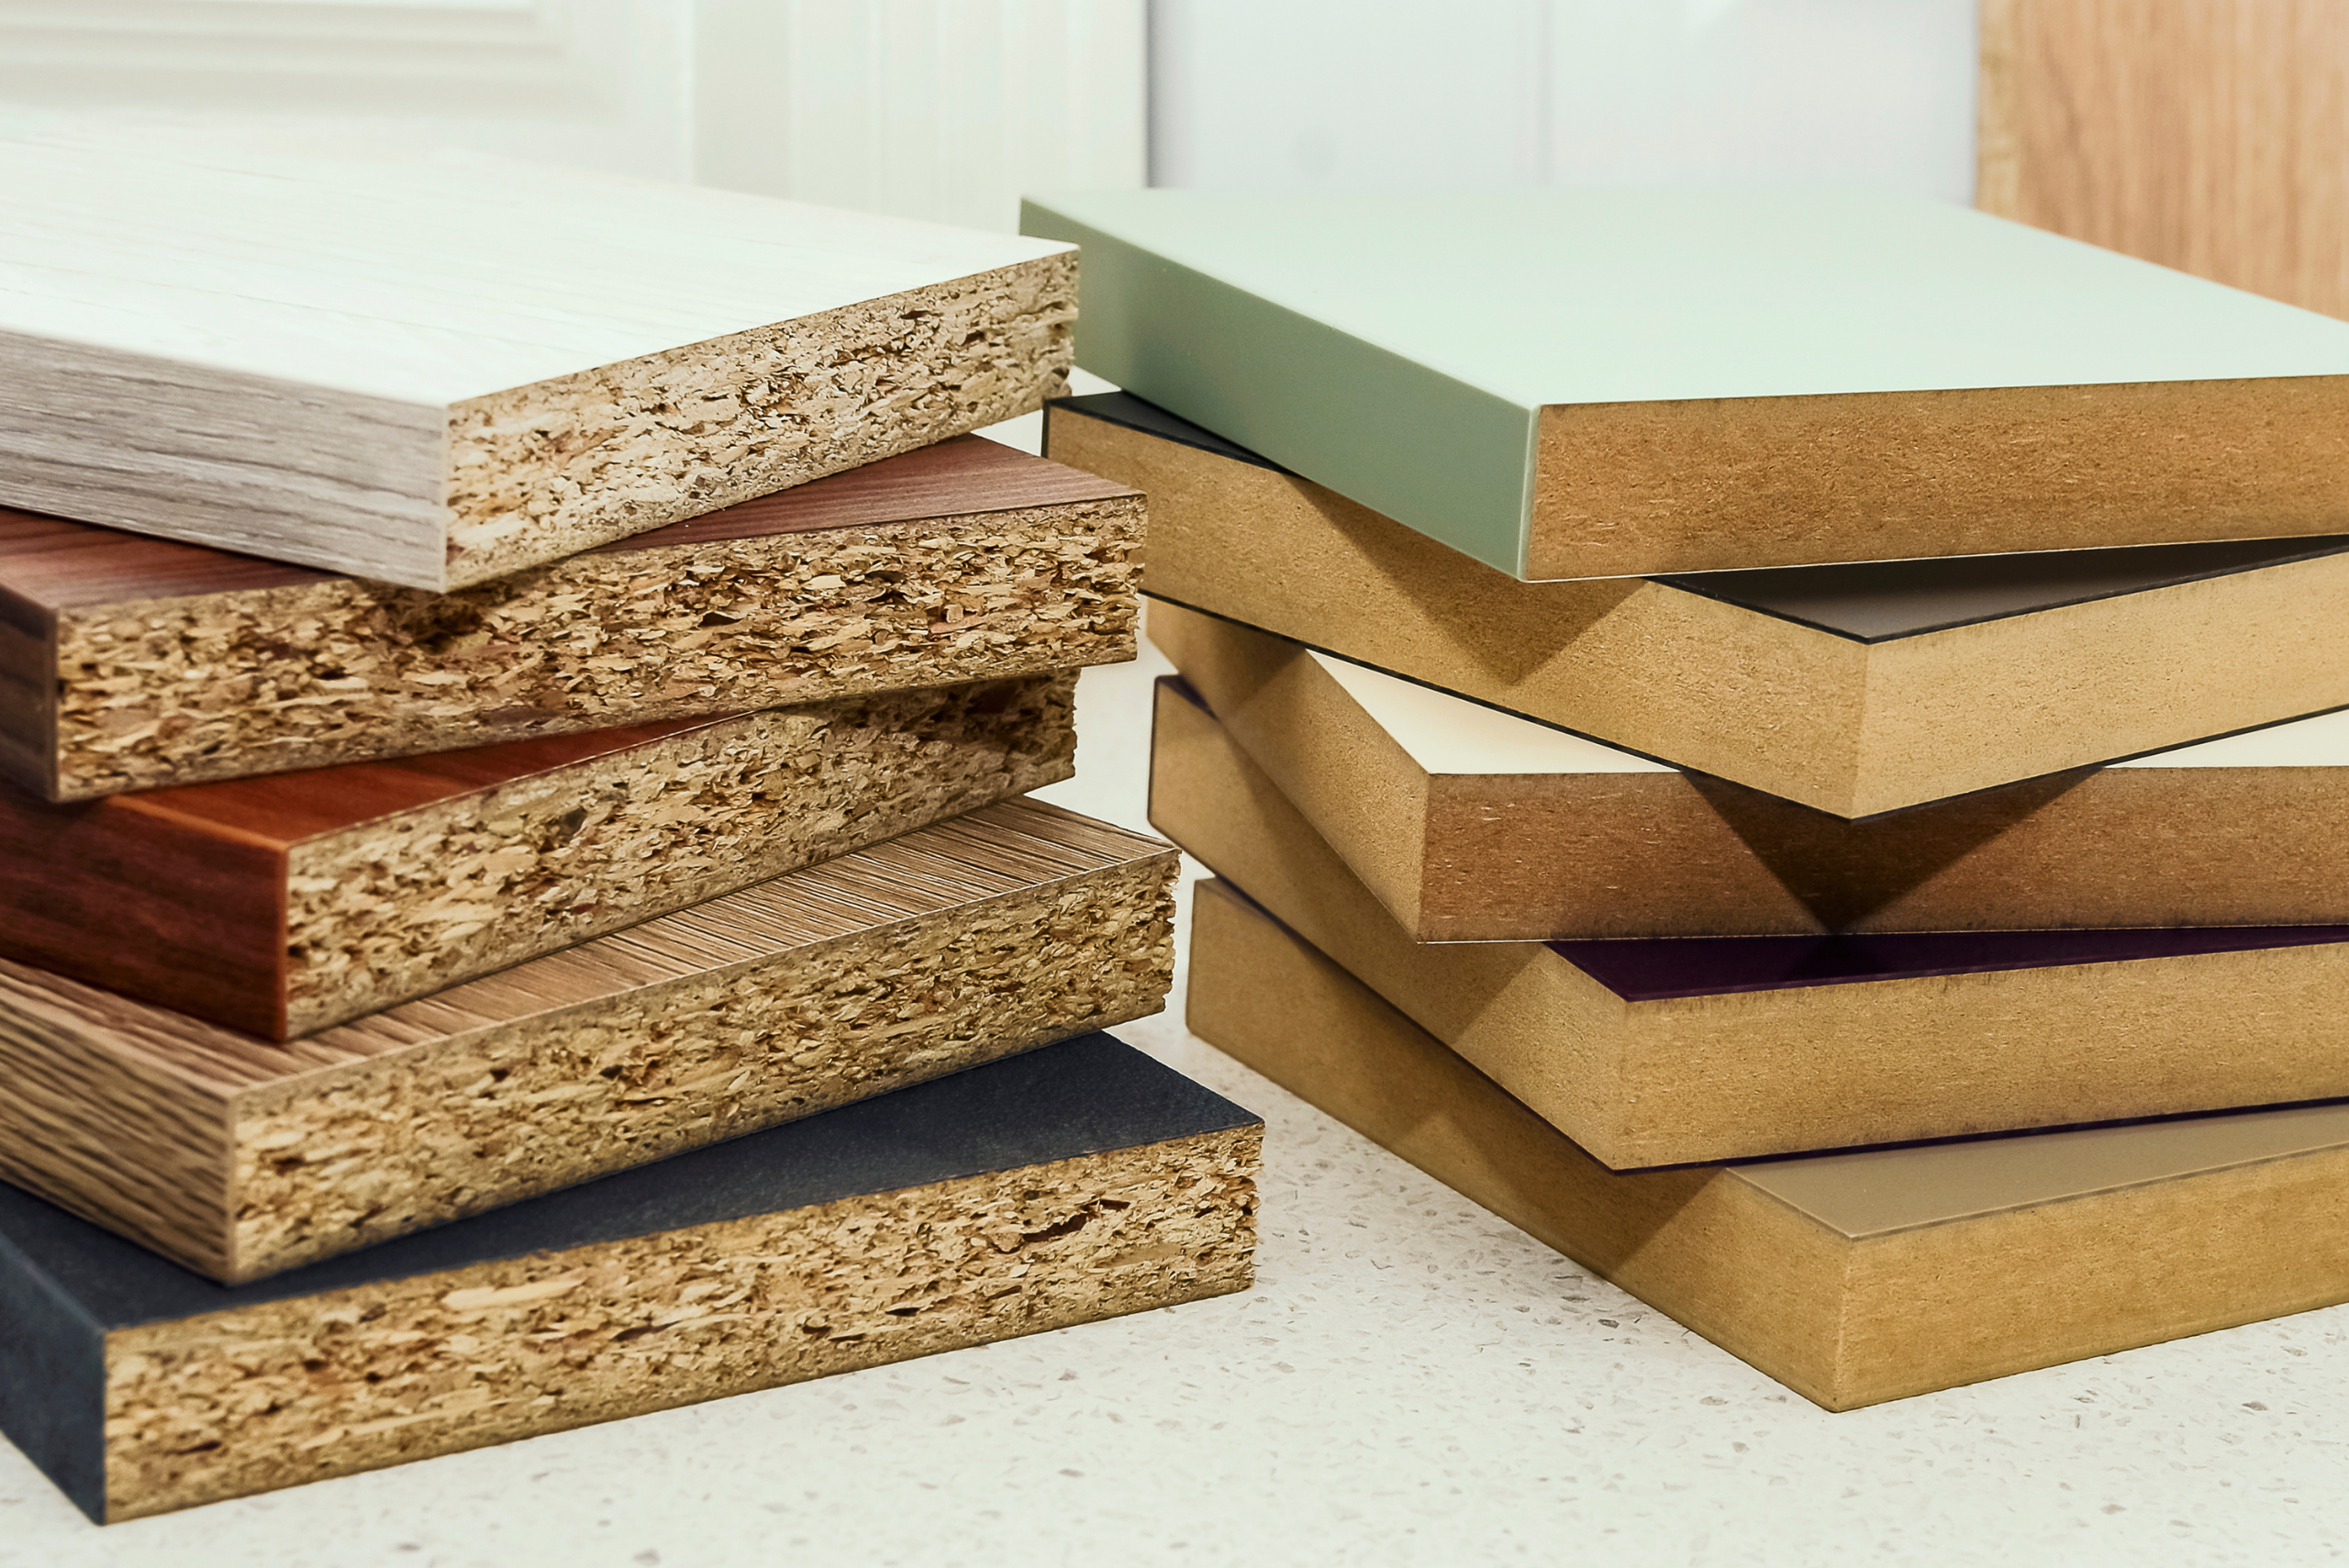 A stack of MDF samples beside a stack of particle boards